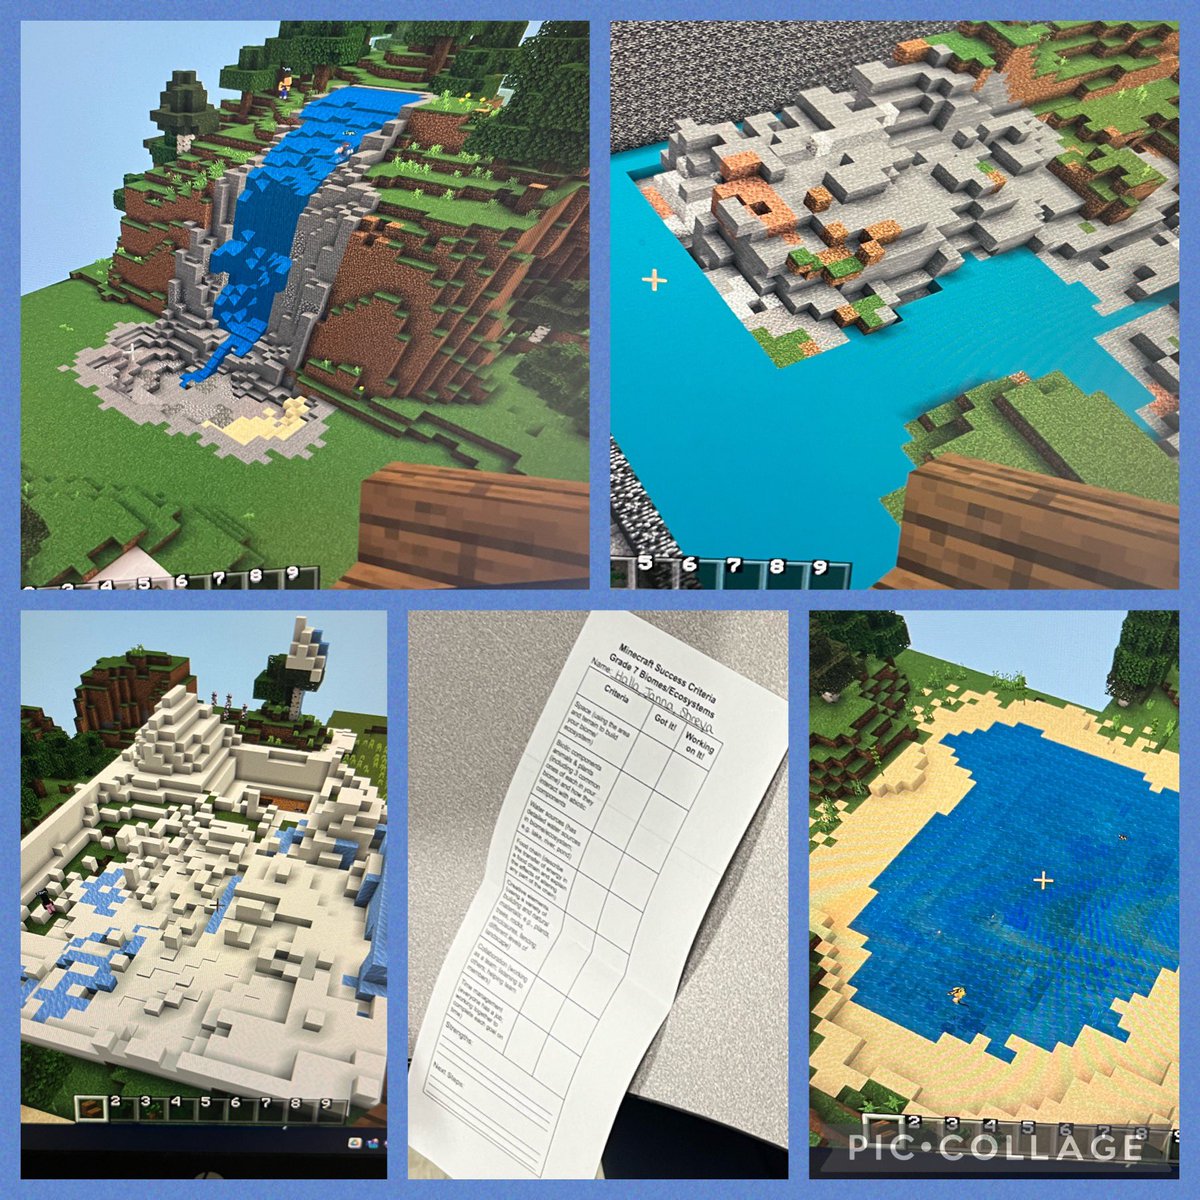 These biomes and ecosystems are looking excellent! Ss using the success criteria to help guide their builds and their researched information. Next, adding more vegetation and animals. Consumers, producers, and food webs. @cedarhollowps @PlayCraftLearn #thehollow 🏔️ 🌊 🌲 🌳